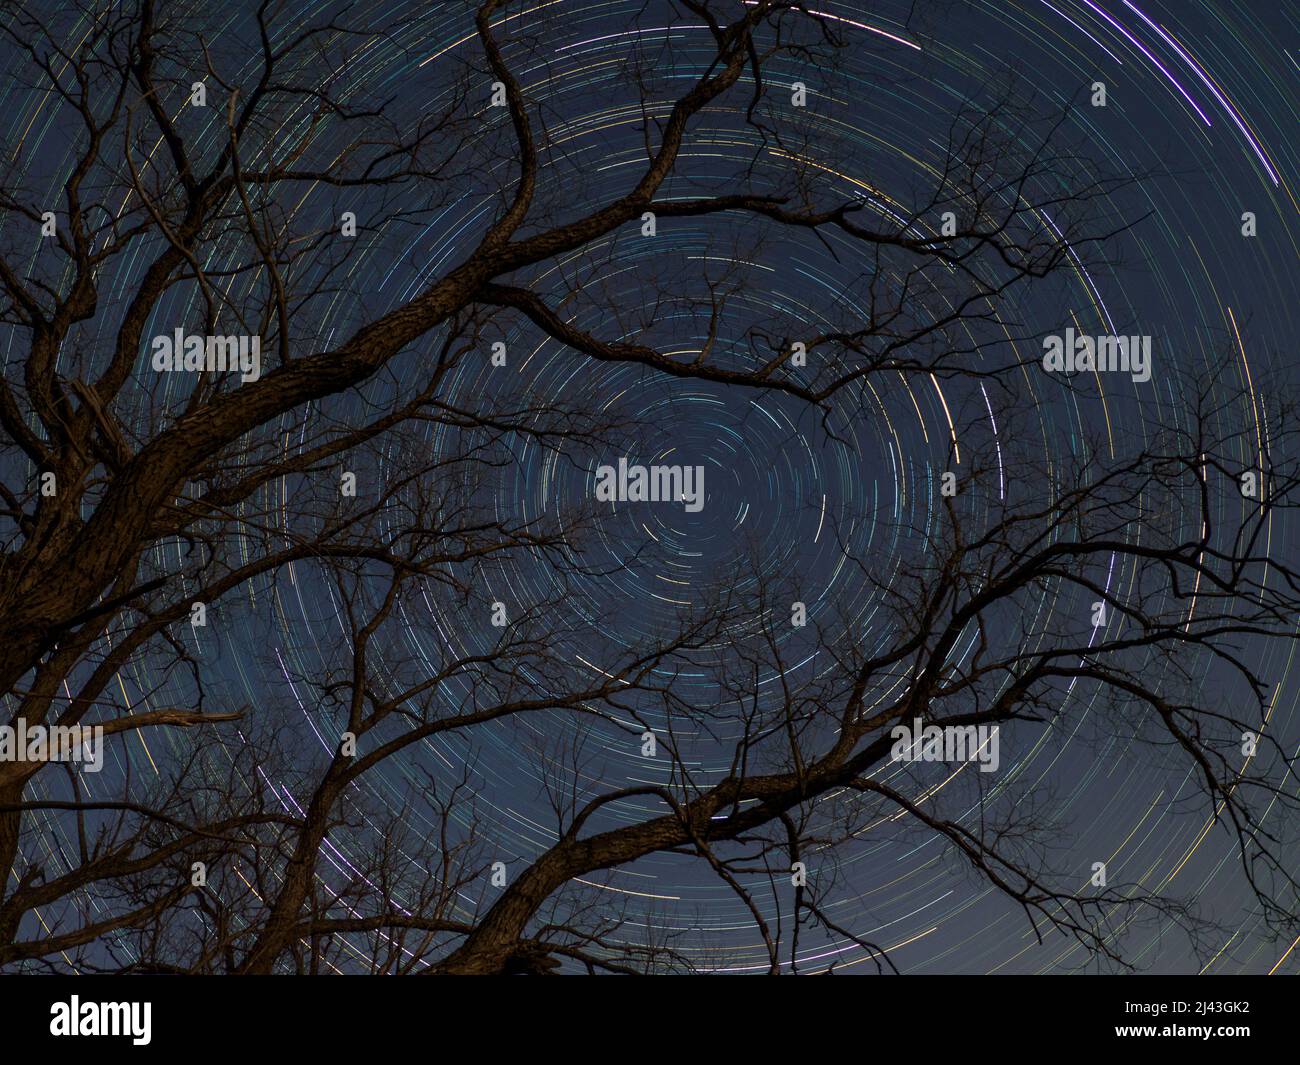 Silence of the stars. Movement of stars around pole star on north hemisphere against tree. Startrails on night sky, long exposure composition. Stock Photo